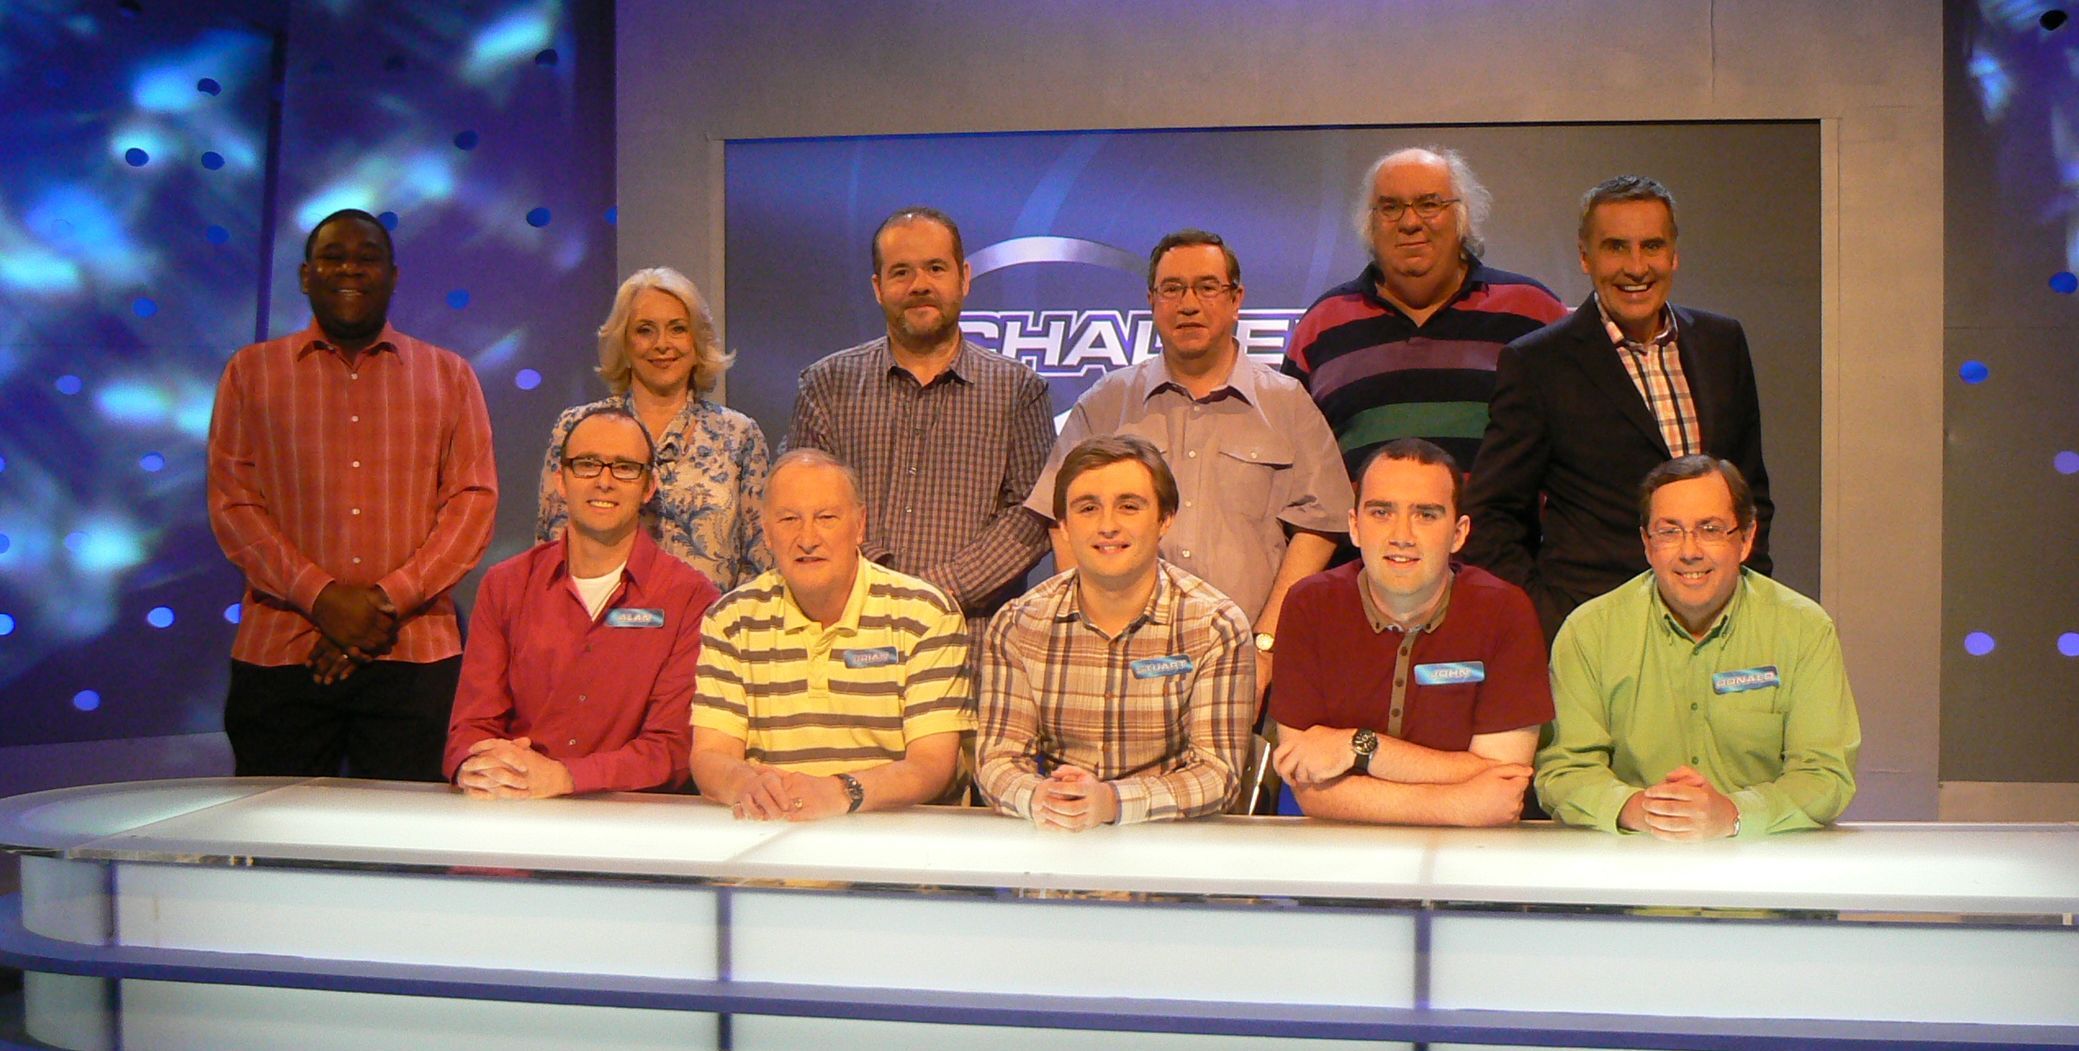 Our team with the Eggheads